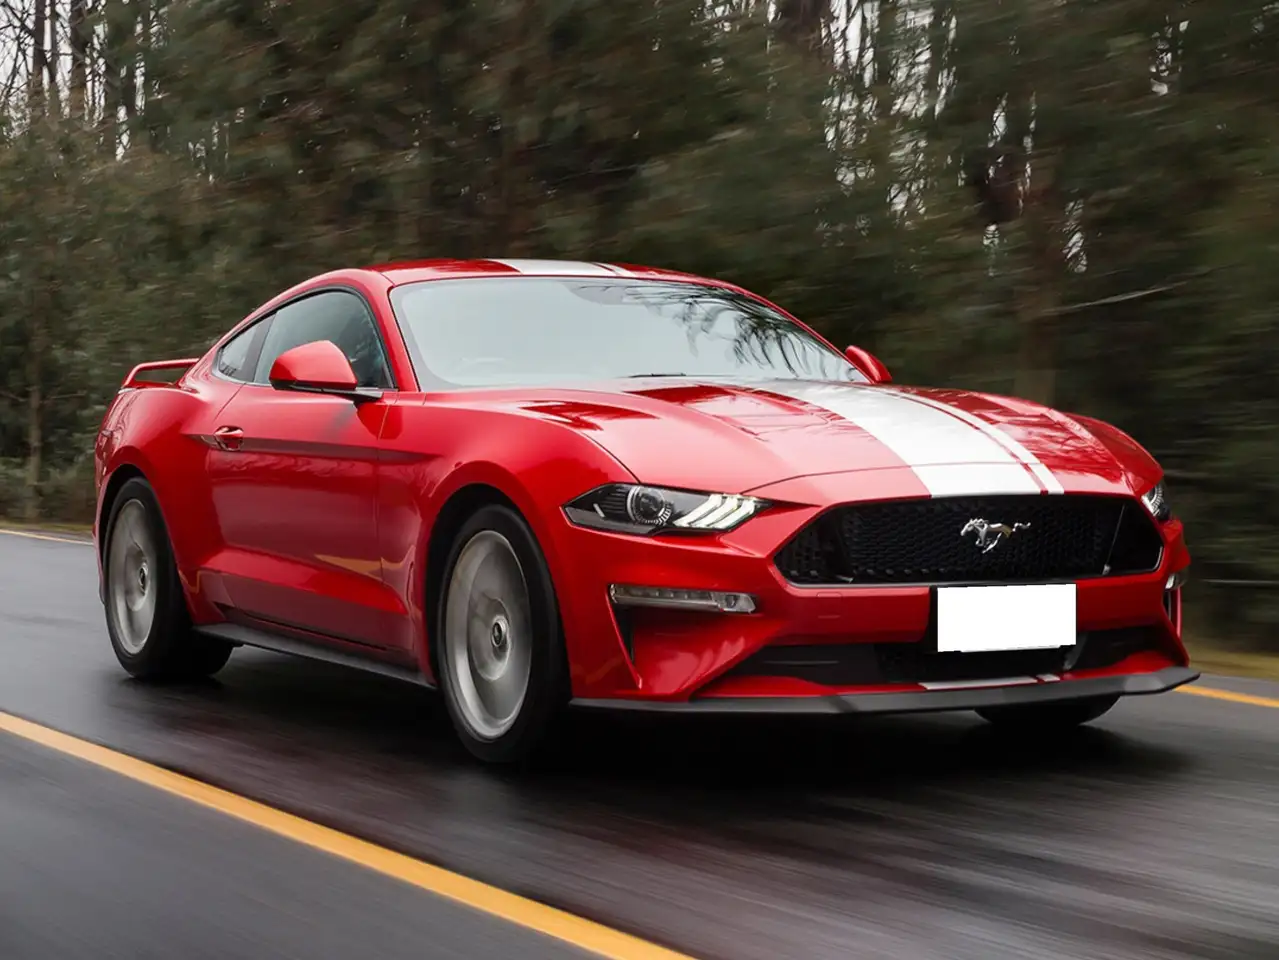 2019 - Ford Mustang Mustang Boîte automatique Coupé